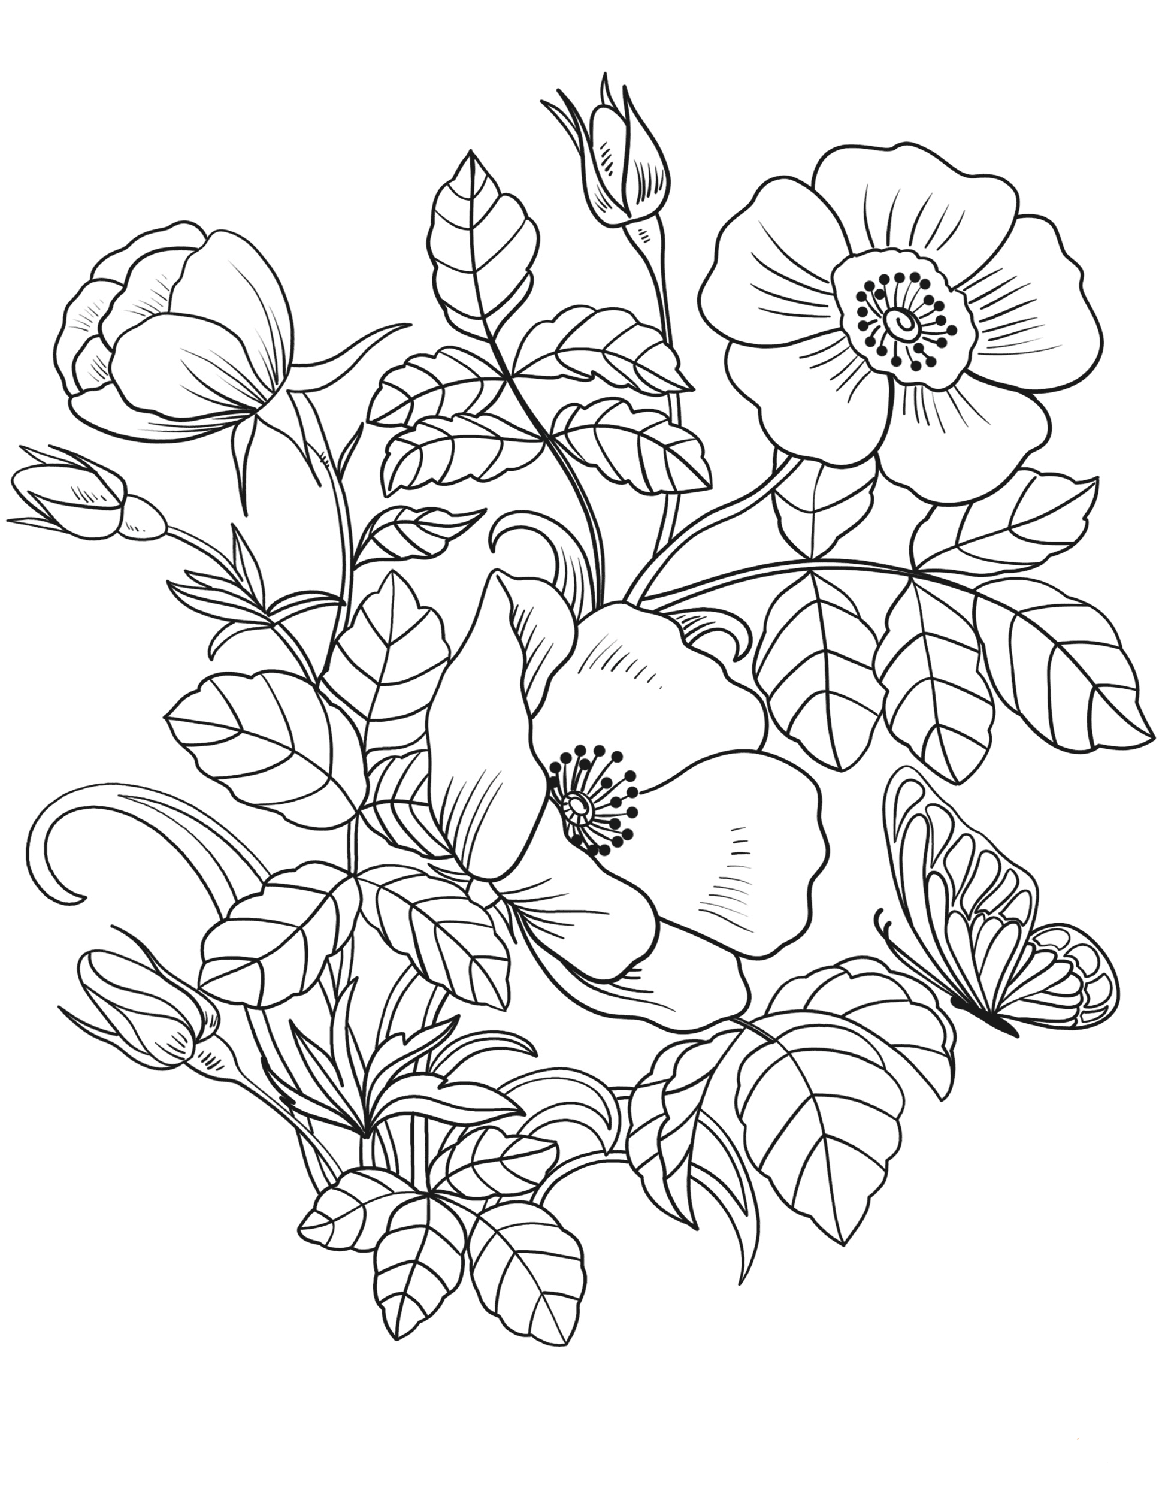 Flower coloring page